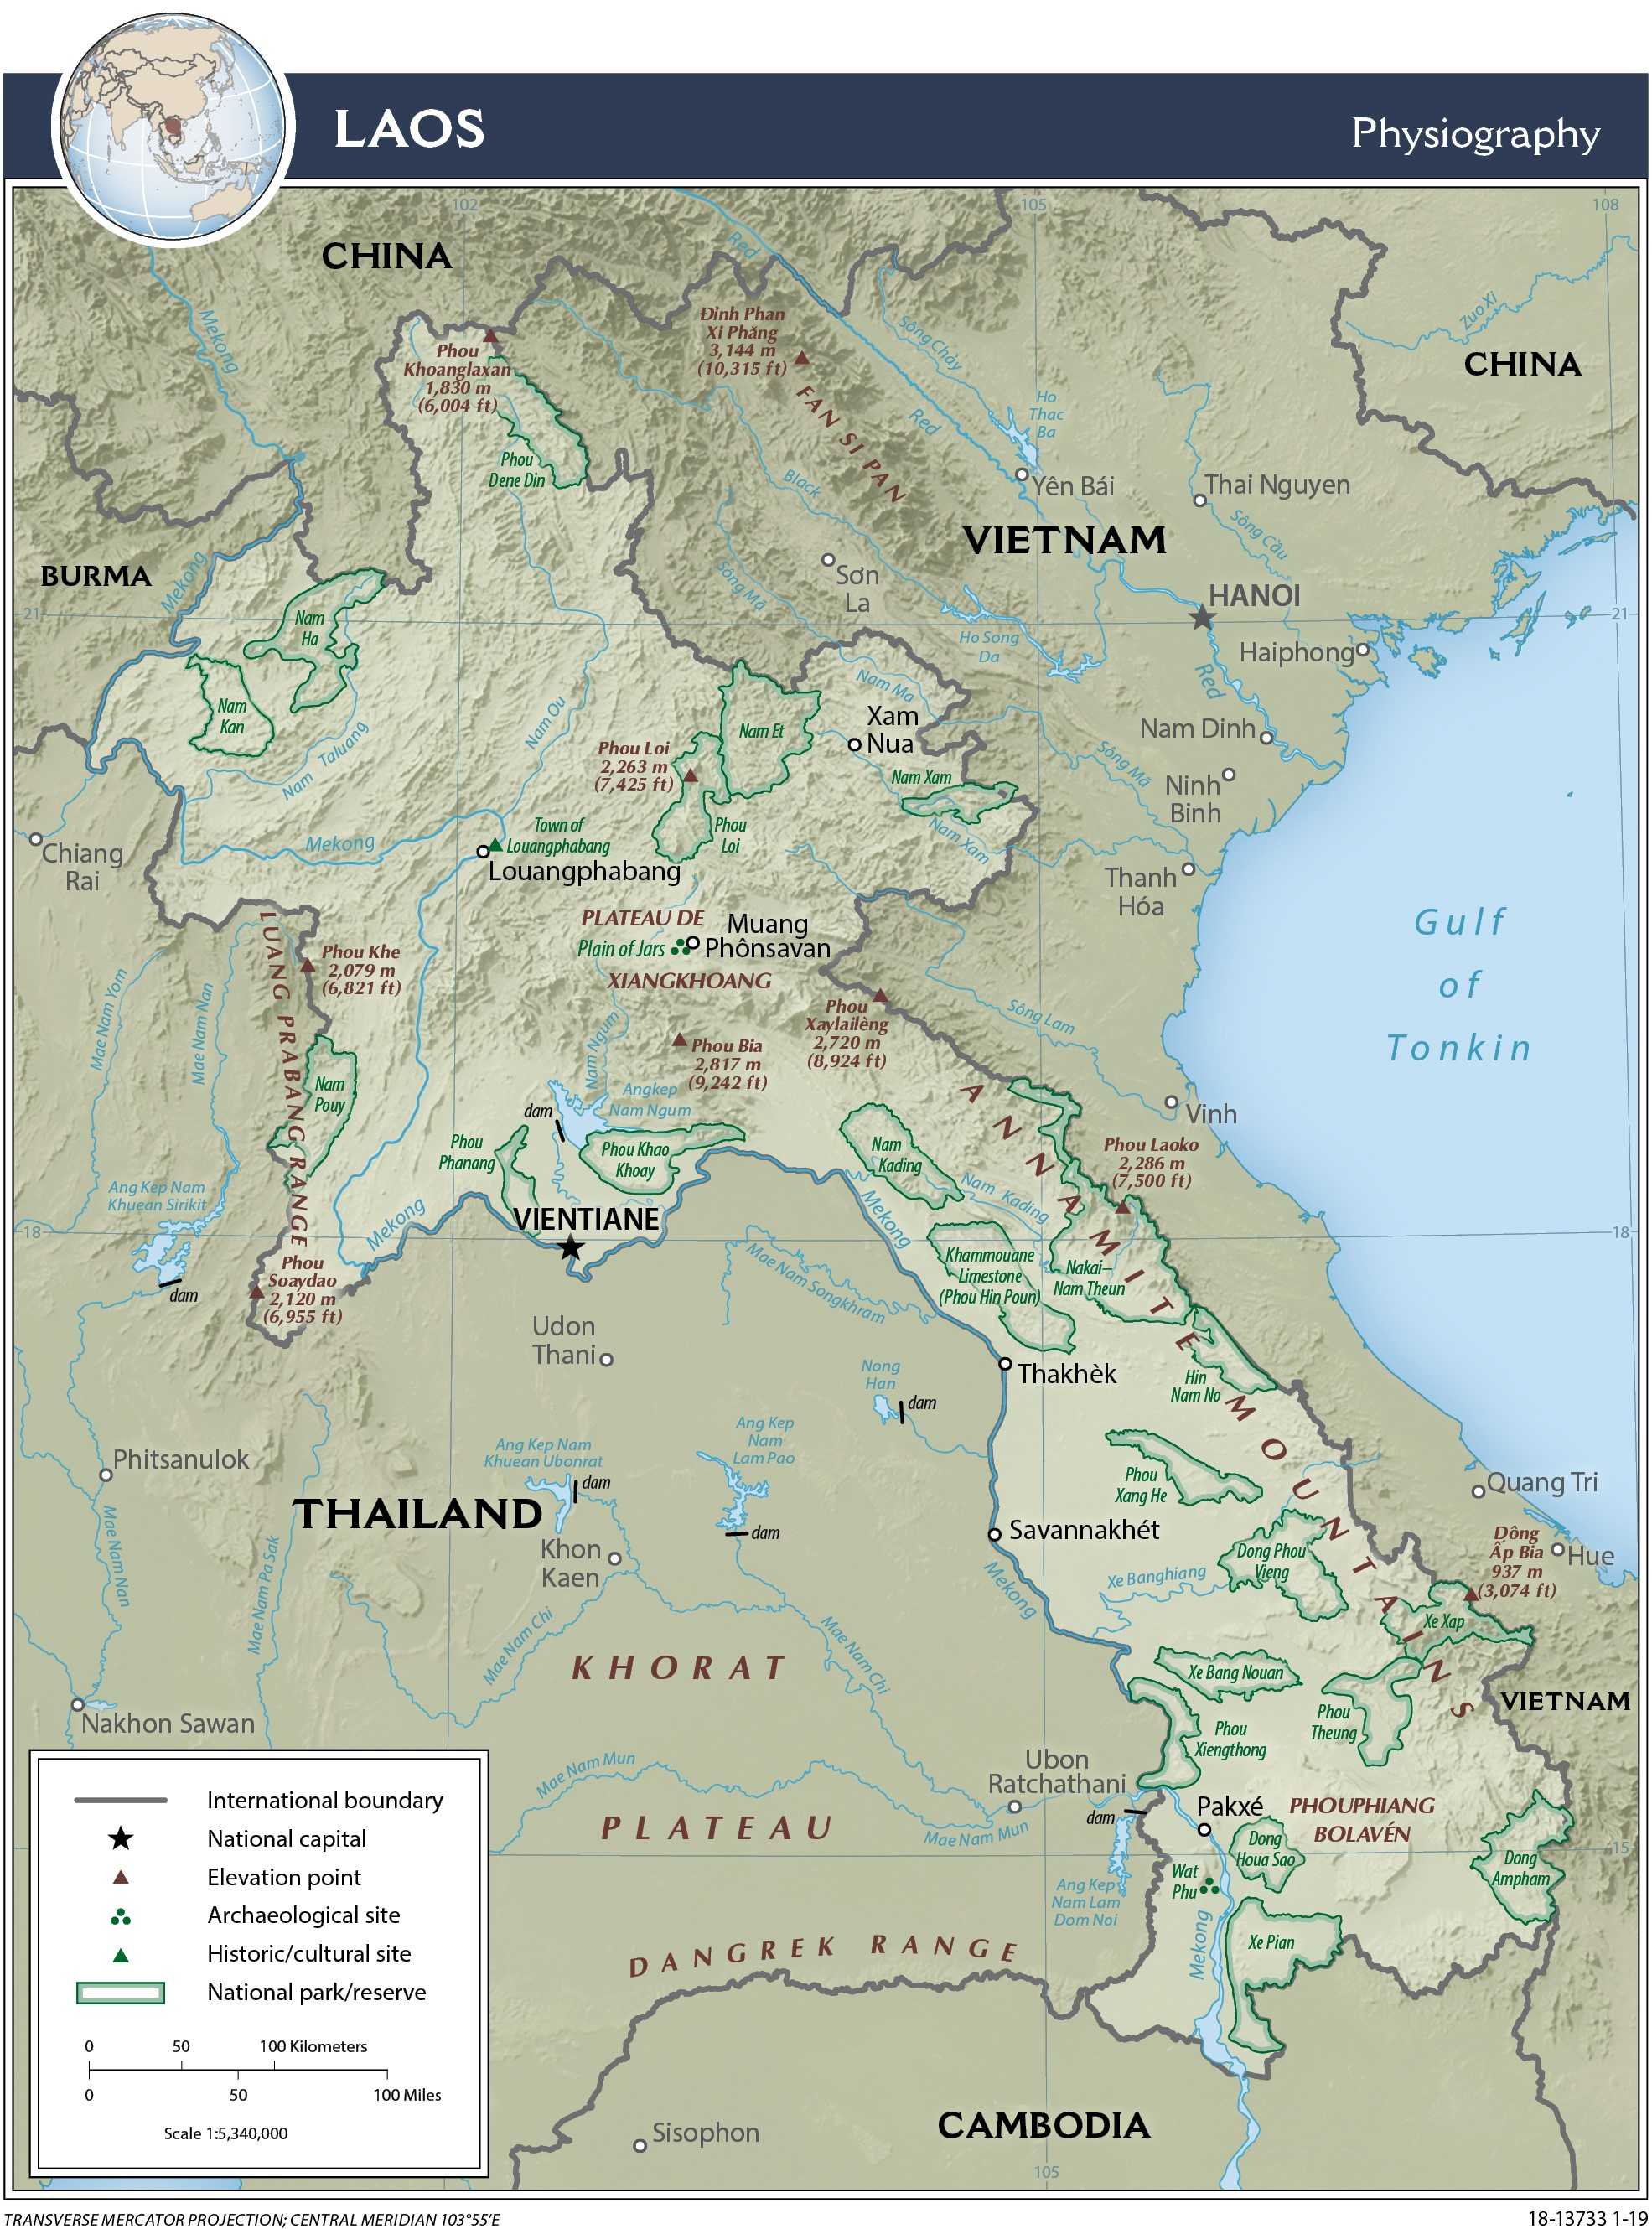 Physiographical map of Laos.